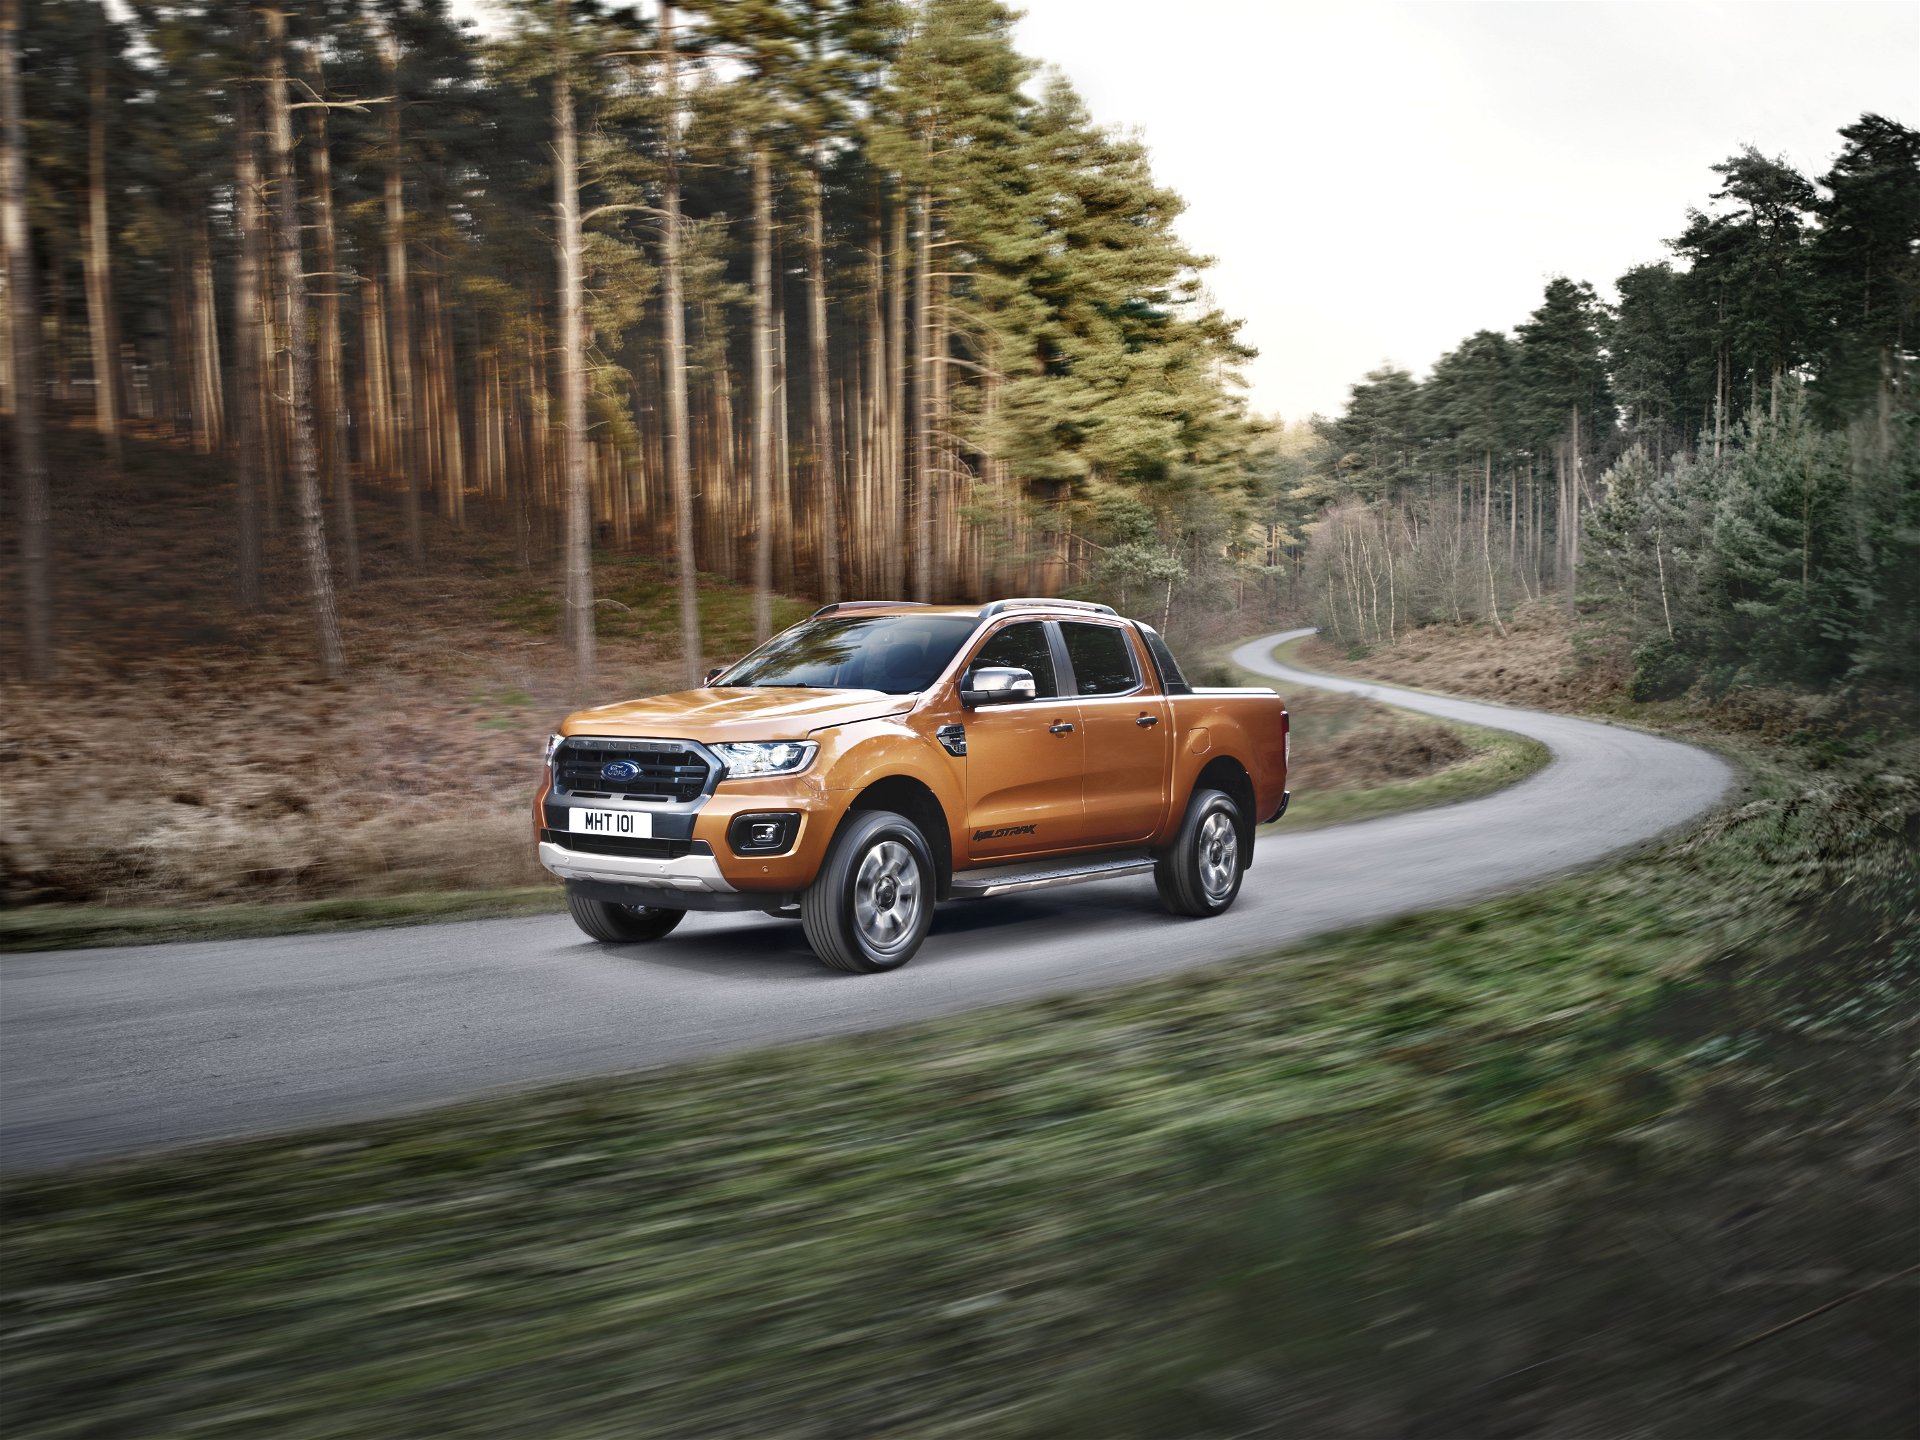 Ford Ranger in orange driving through a forest road